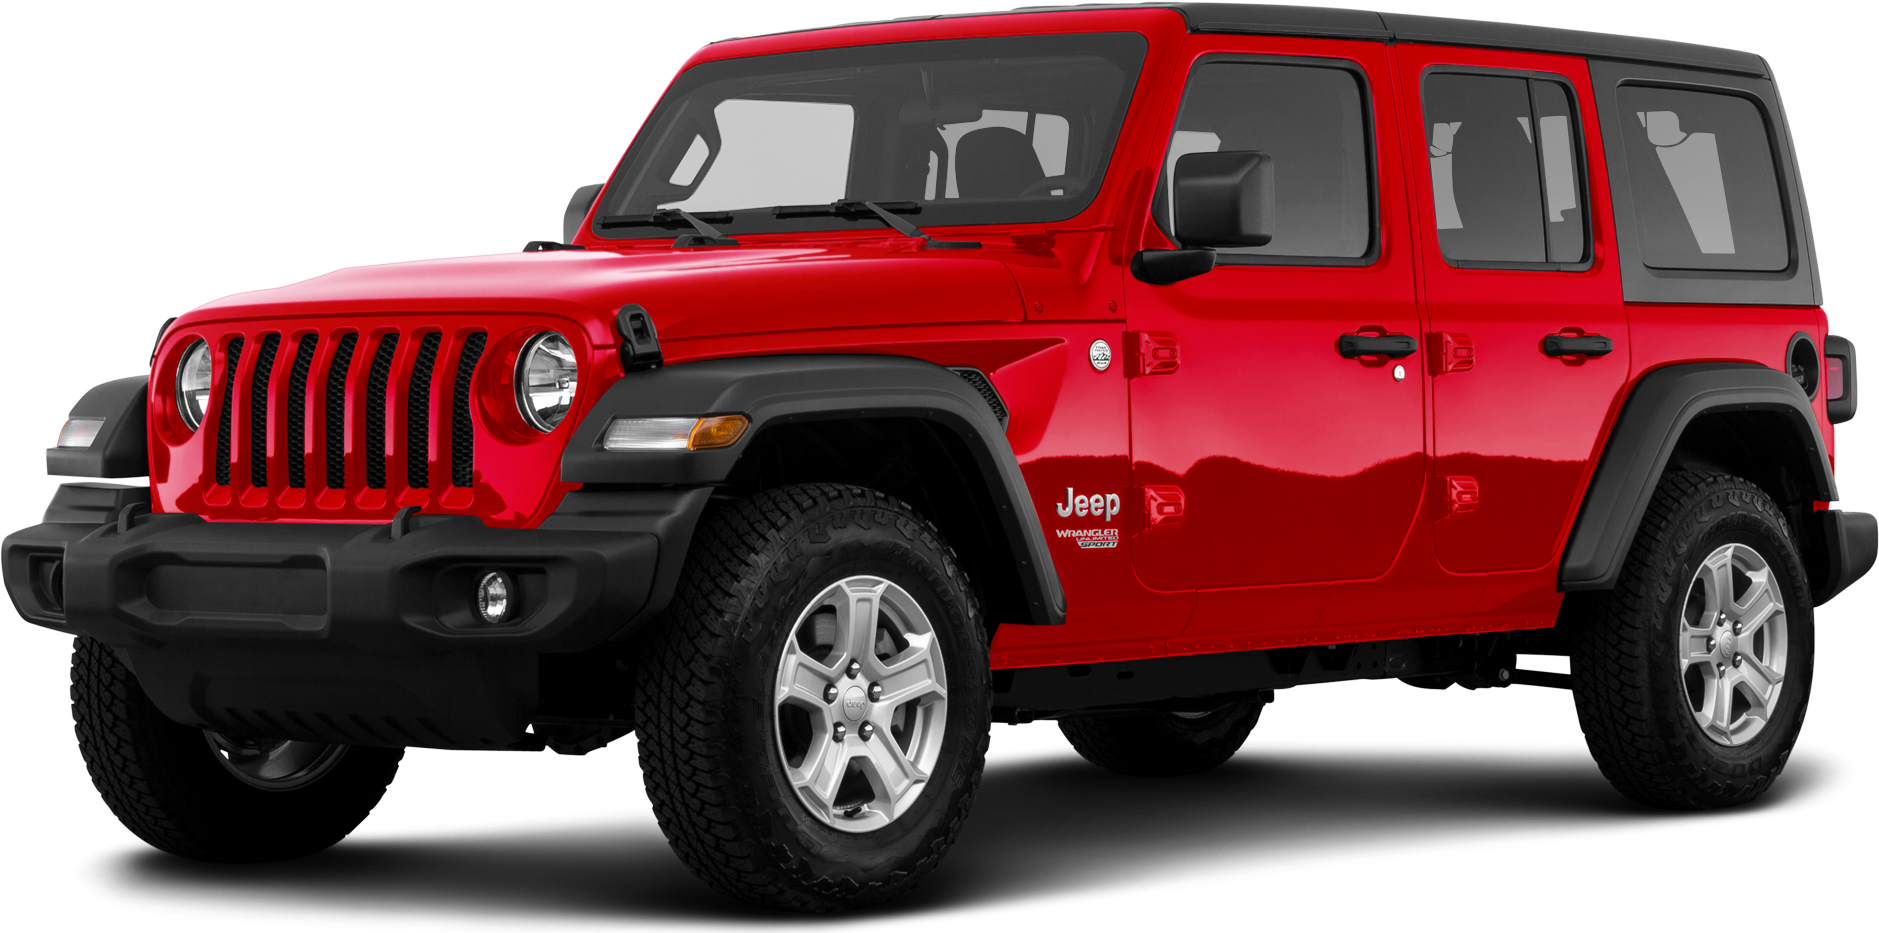 2018 Jeep Wrangler JK Unlimited Sahara 4dr 4x4 Specs and Prices - Autoblog